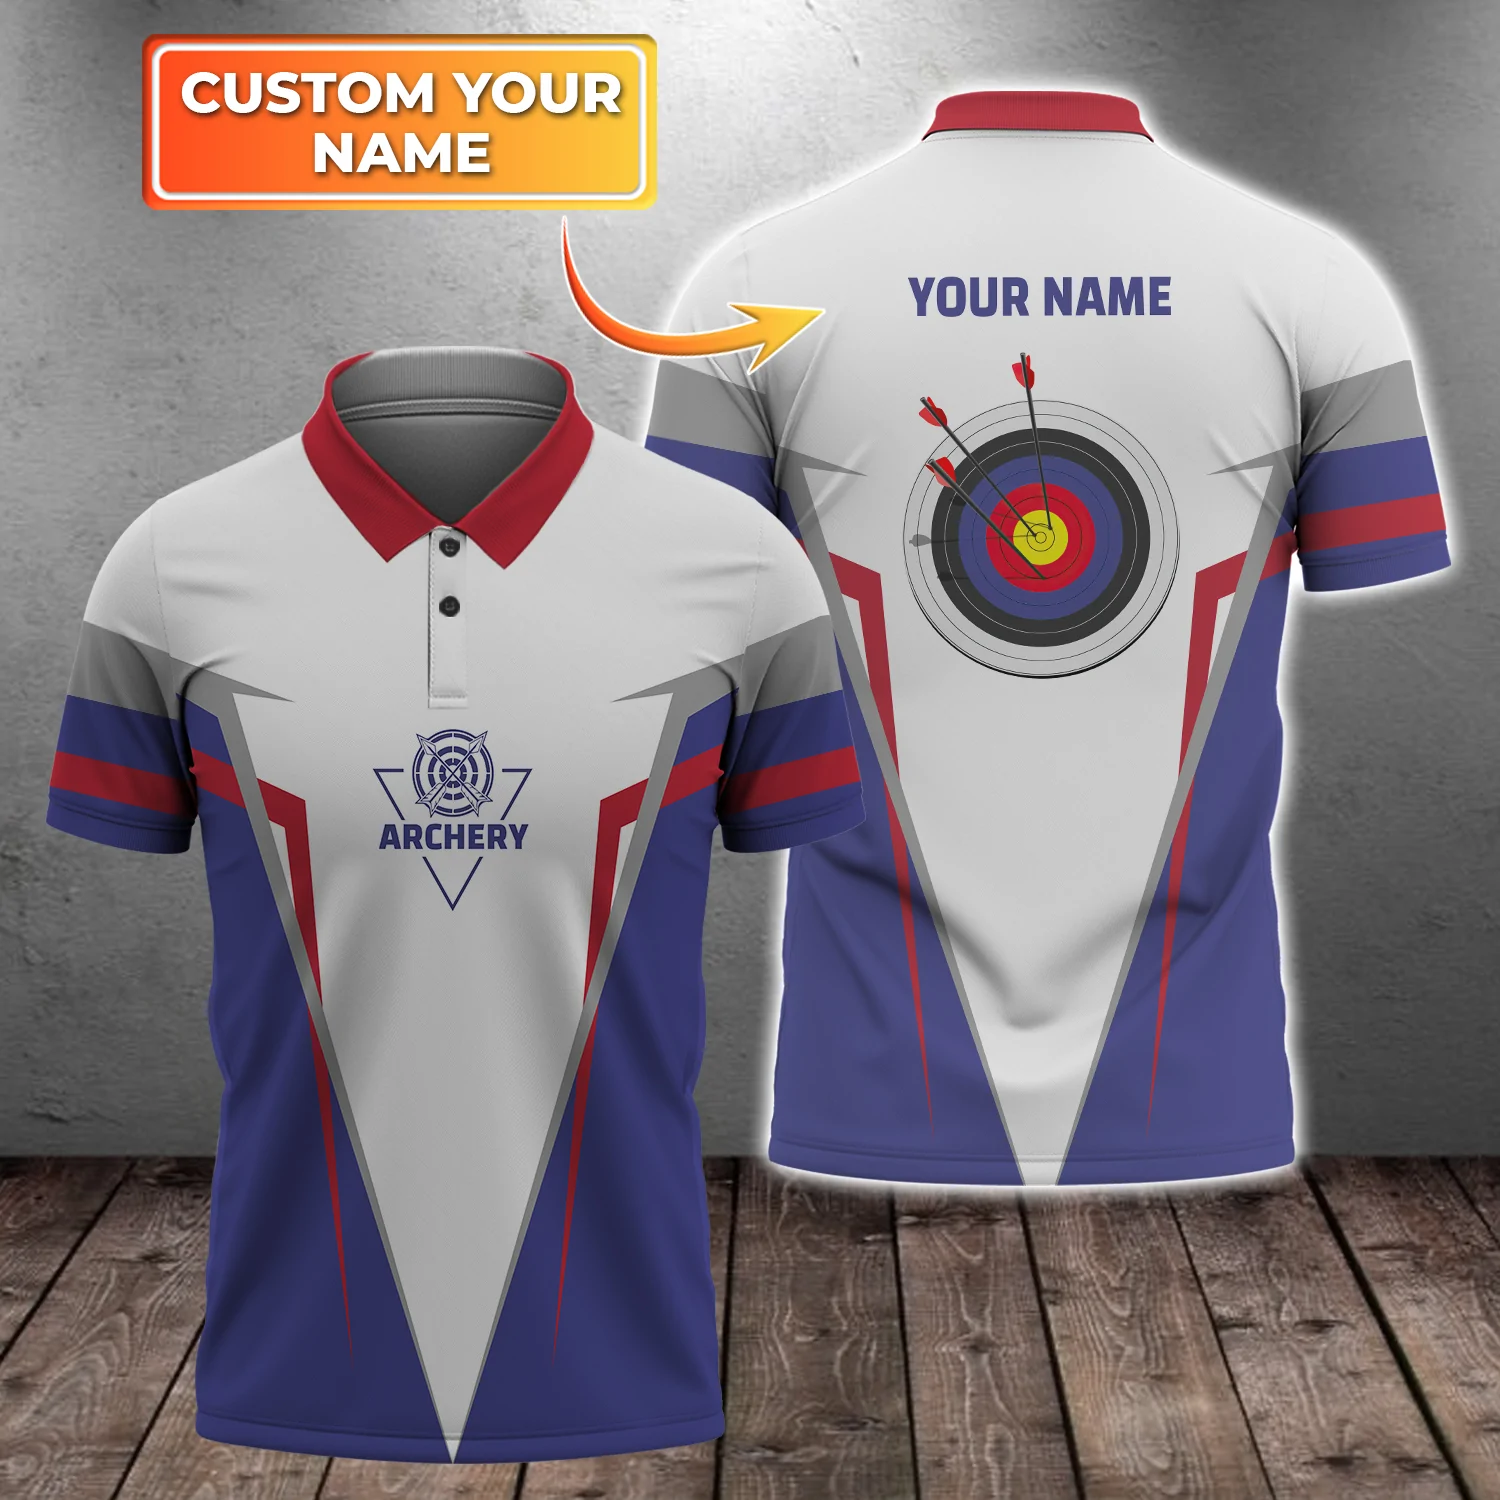 Personalized With Name Archery Polo Shirt/ 3D Archery Shirts/ Birthday Gift For Archery Team Lover